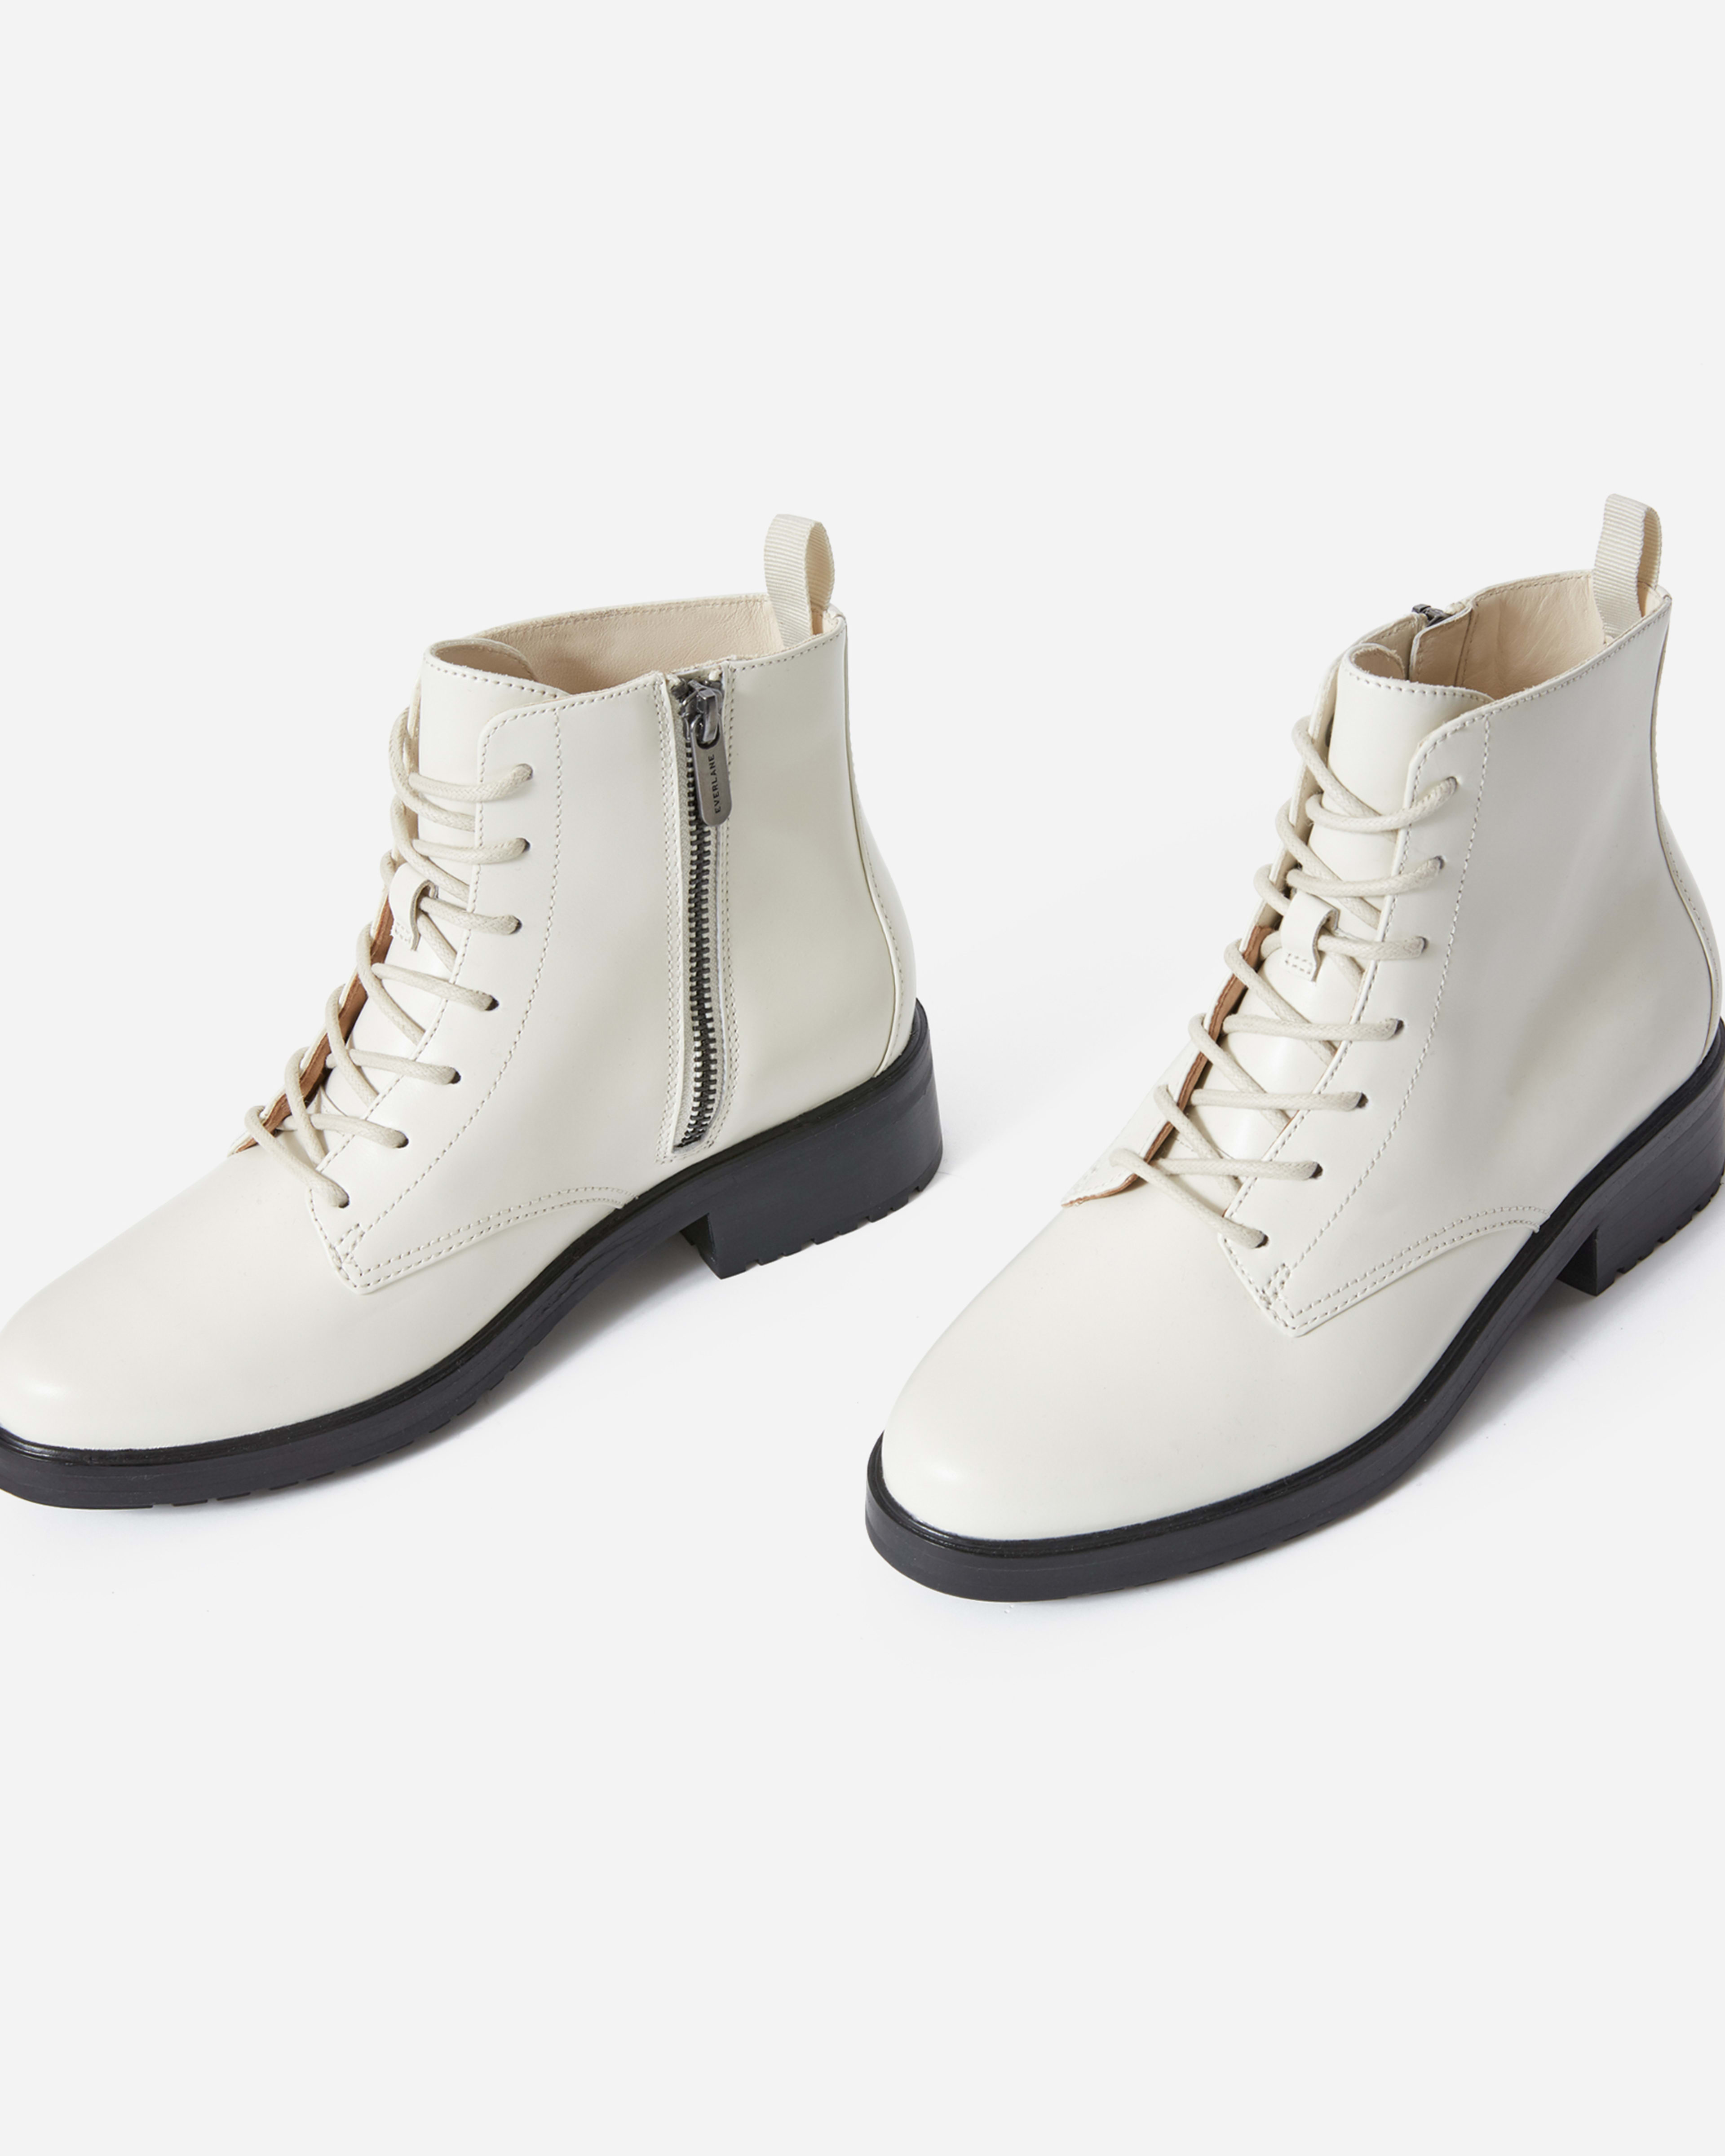 The Modern Utility Lace-Up Boot White – Everlane